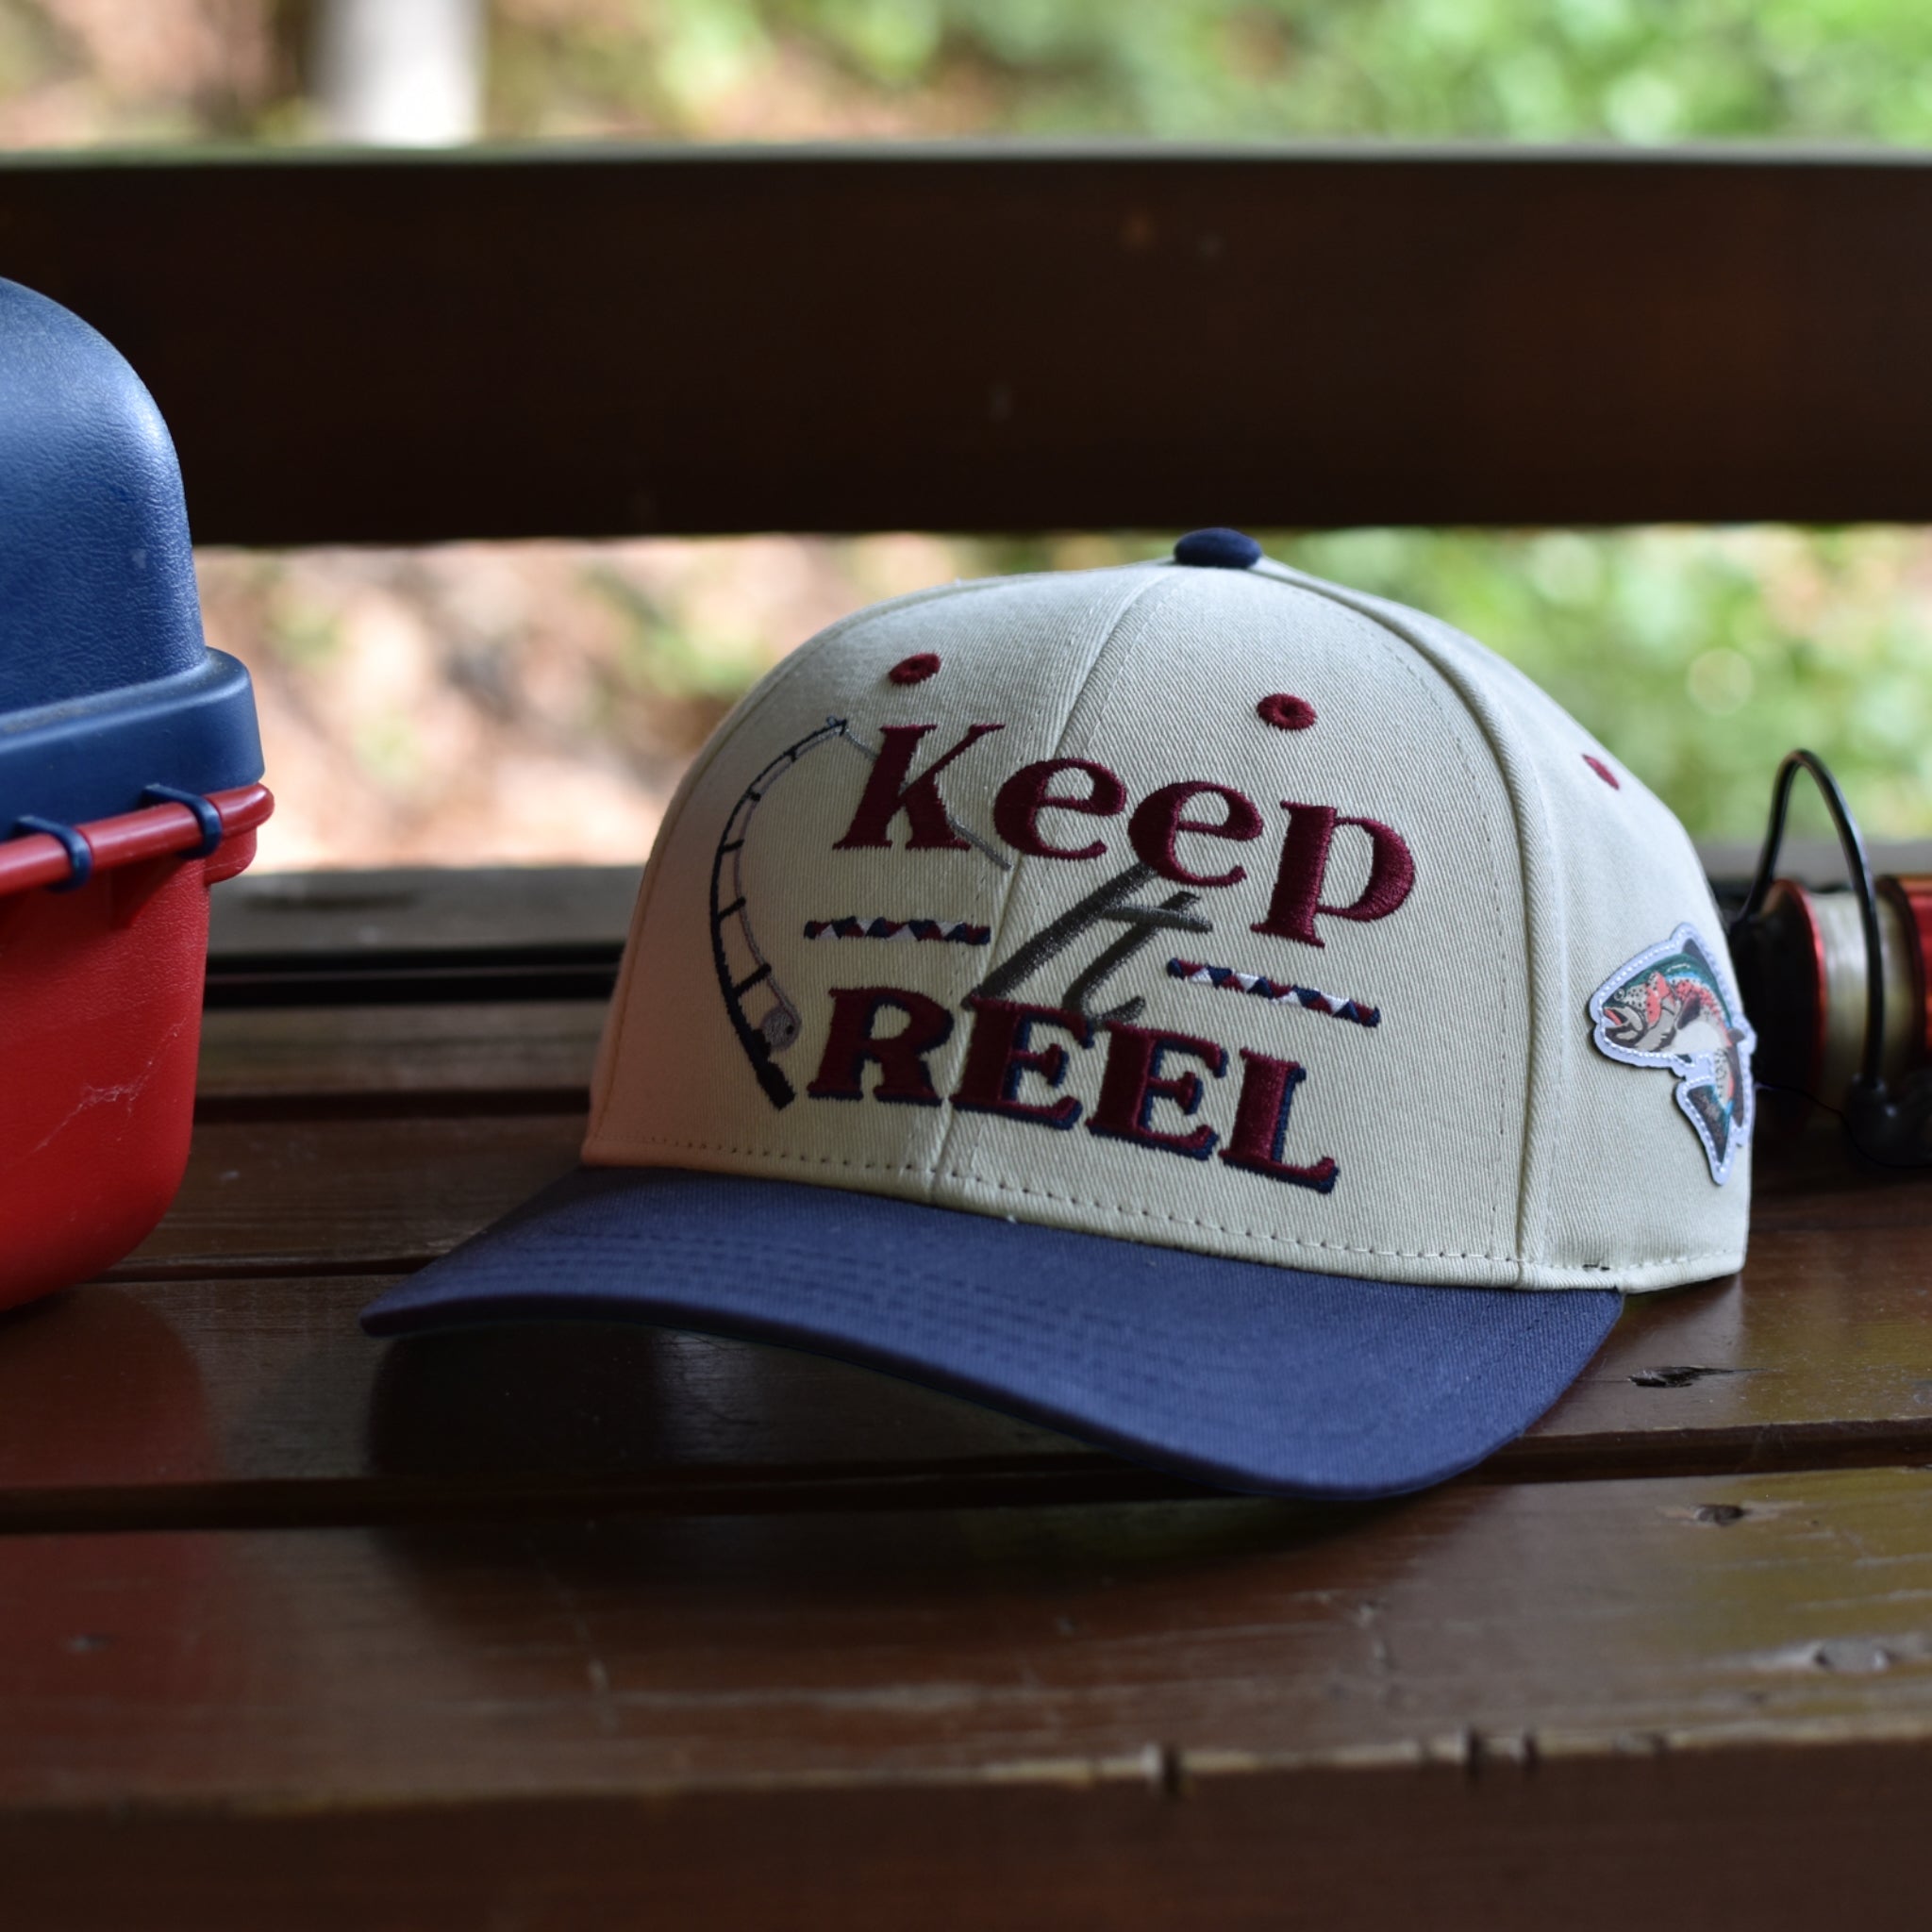 Fishing Hats With Vintage Style  Keep It Reel Snapback – Shells Vintage Hat  Co.